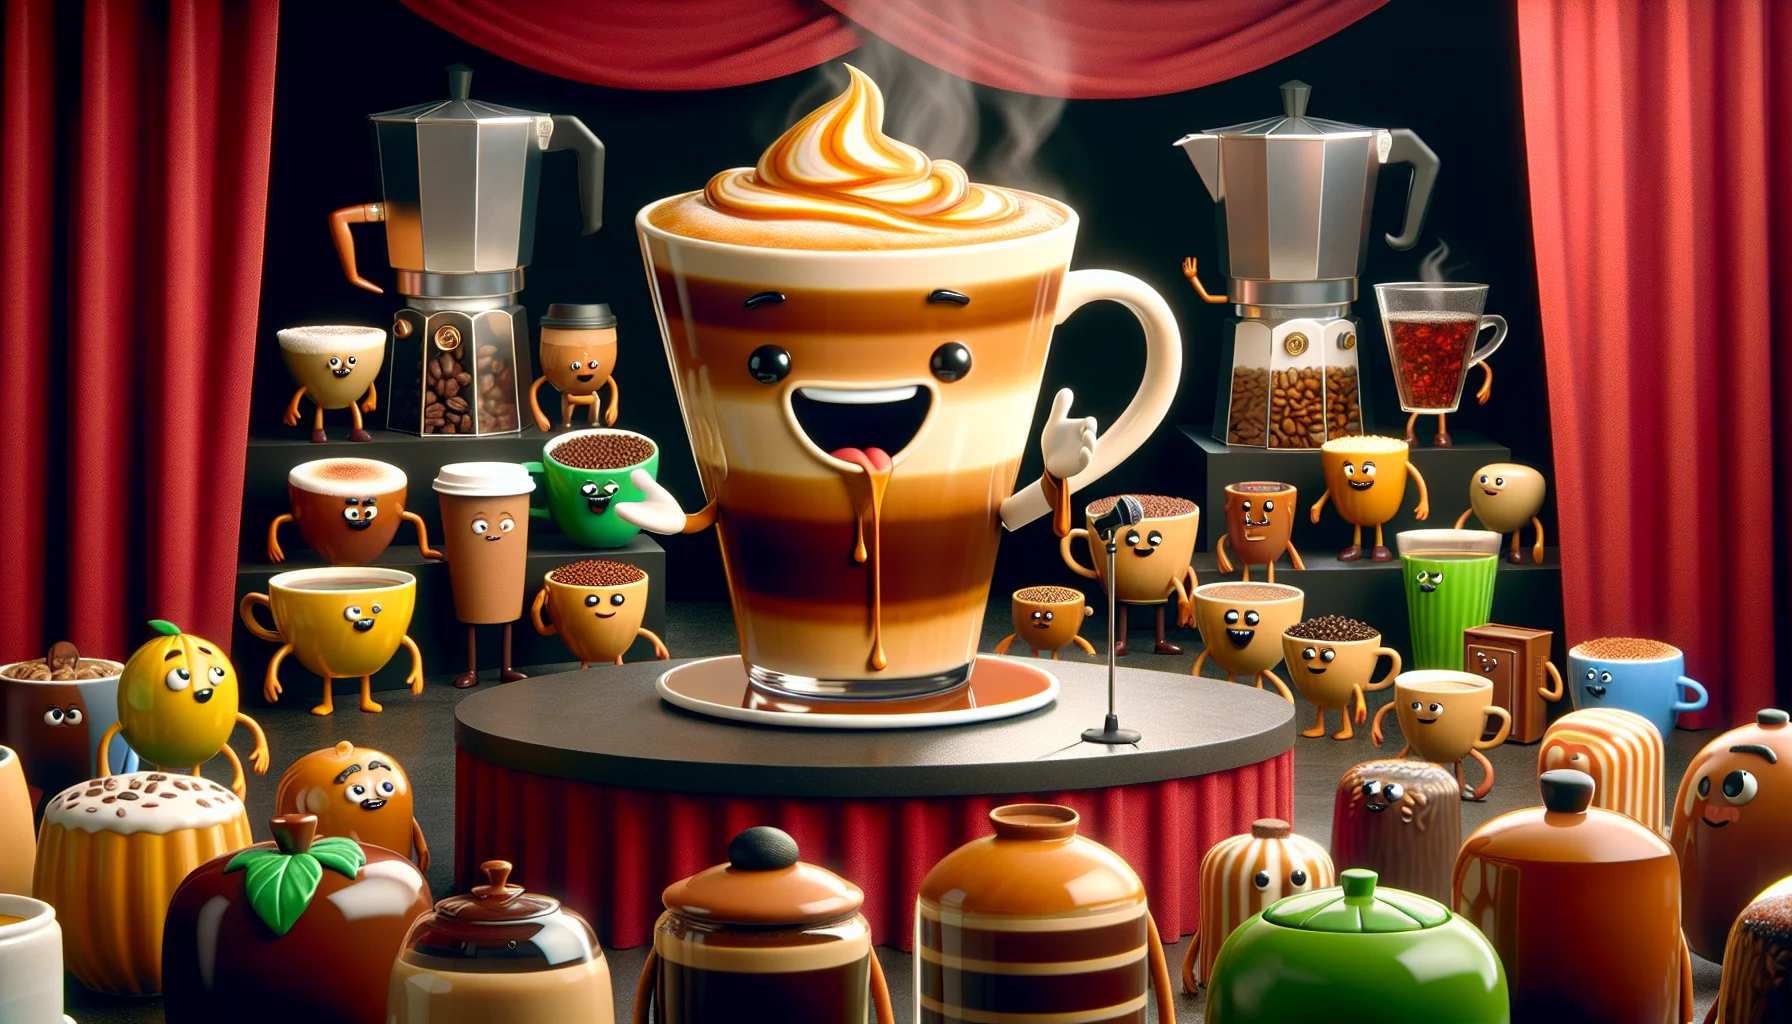 Create a comical yet realistic digital art piece representing a steaming mug of caramel cappuccino. This mug should be anthropomorphised with expressive features and mimicking a charismatic salesperson on a mini stage. Around it are a diverse crowd of various other anthropomorphised hot beverage choices, including a green tea, English breakfast tea, spiced chai, black coffee and even a cup of hot chocolate. These characters look amazed and won over by the charismatic presentation of the caramel cappuccino. The setting is akin to a classic coffee and tea brewing station styled as a theatre stage, filled with various brewing apparatus and coffee-bean and tea-leaf showcases.